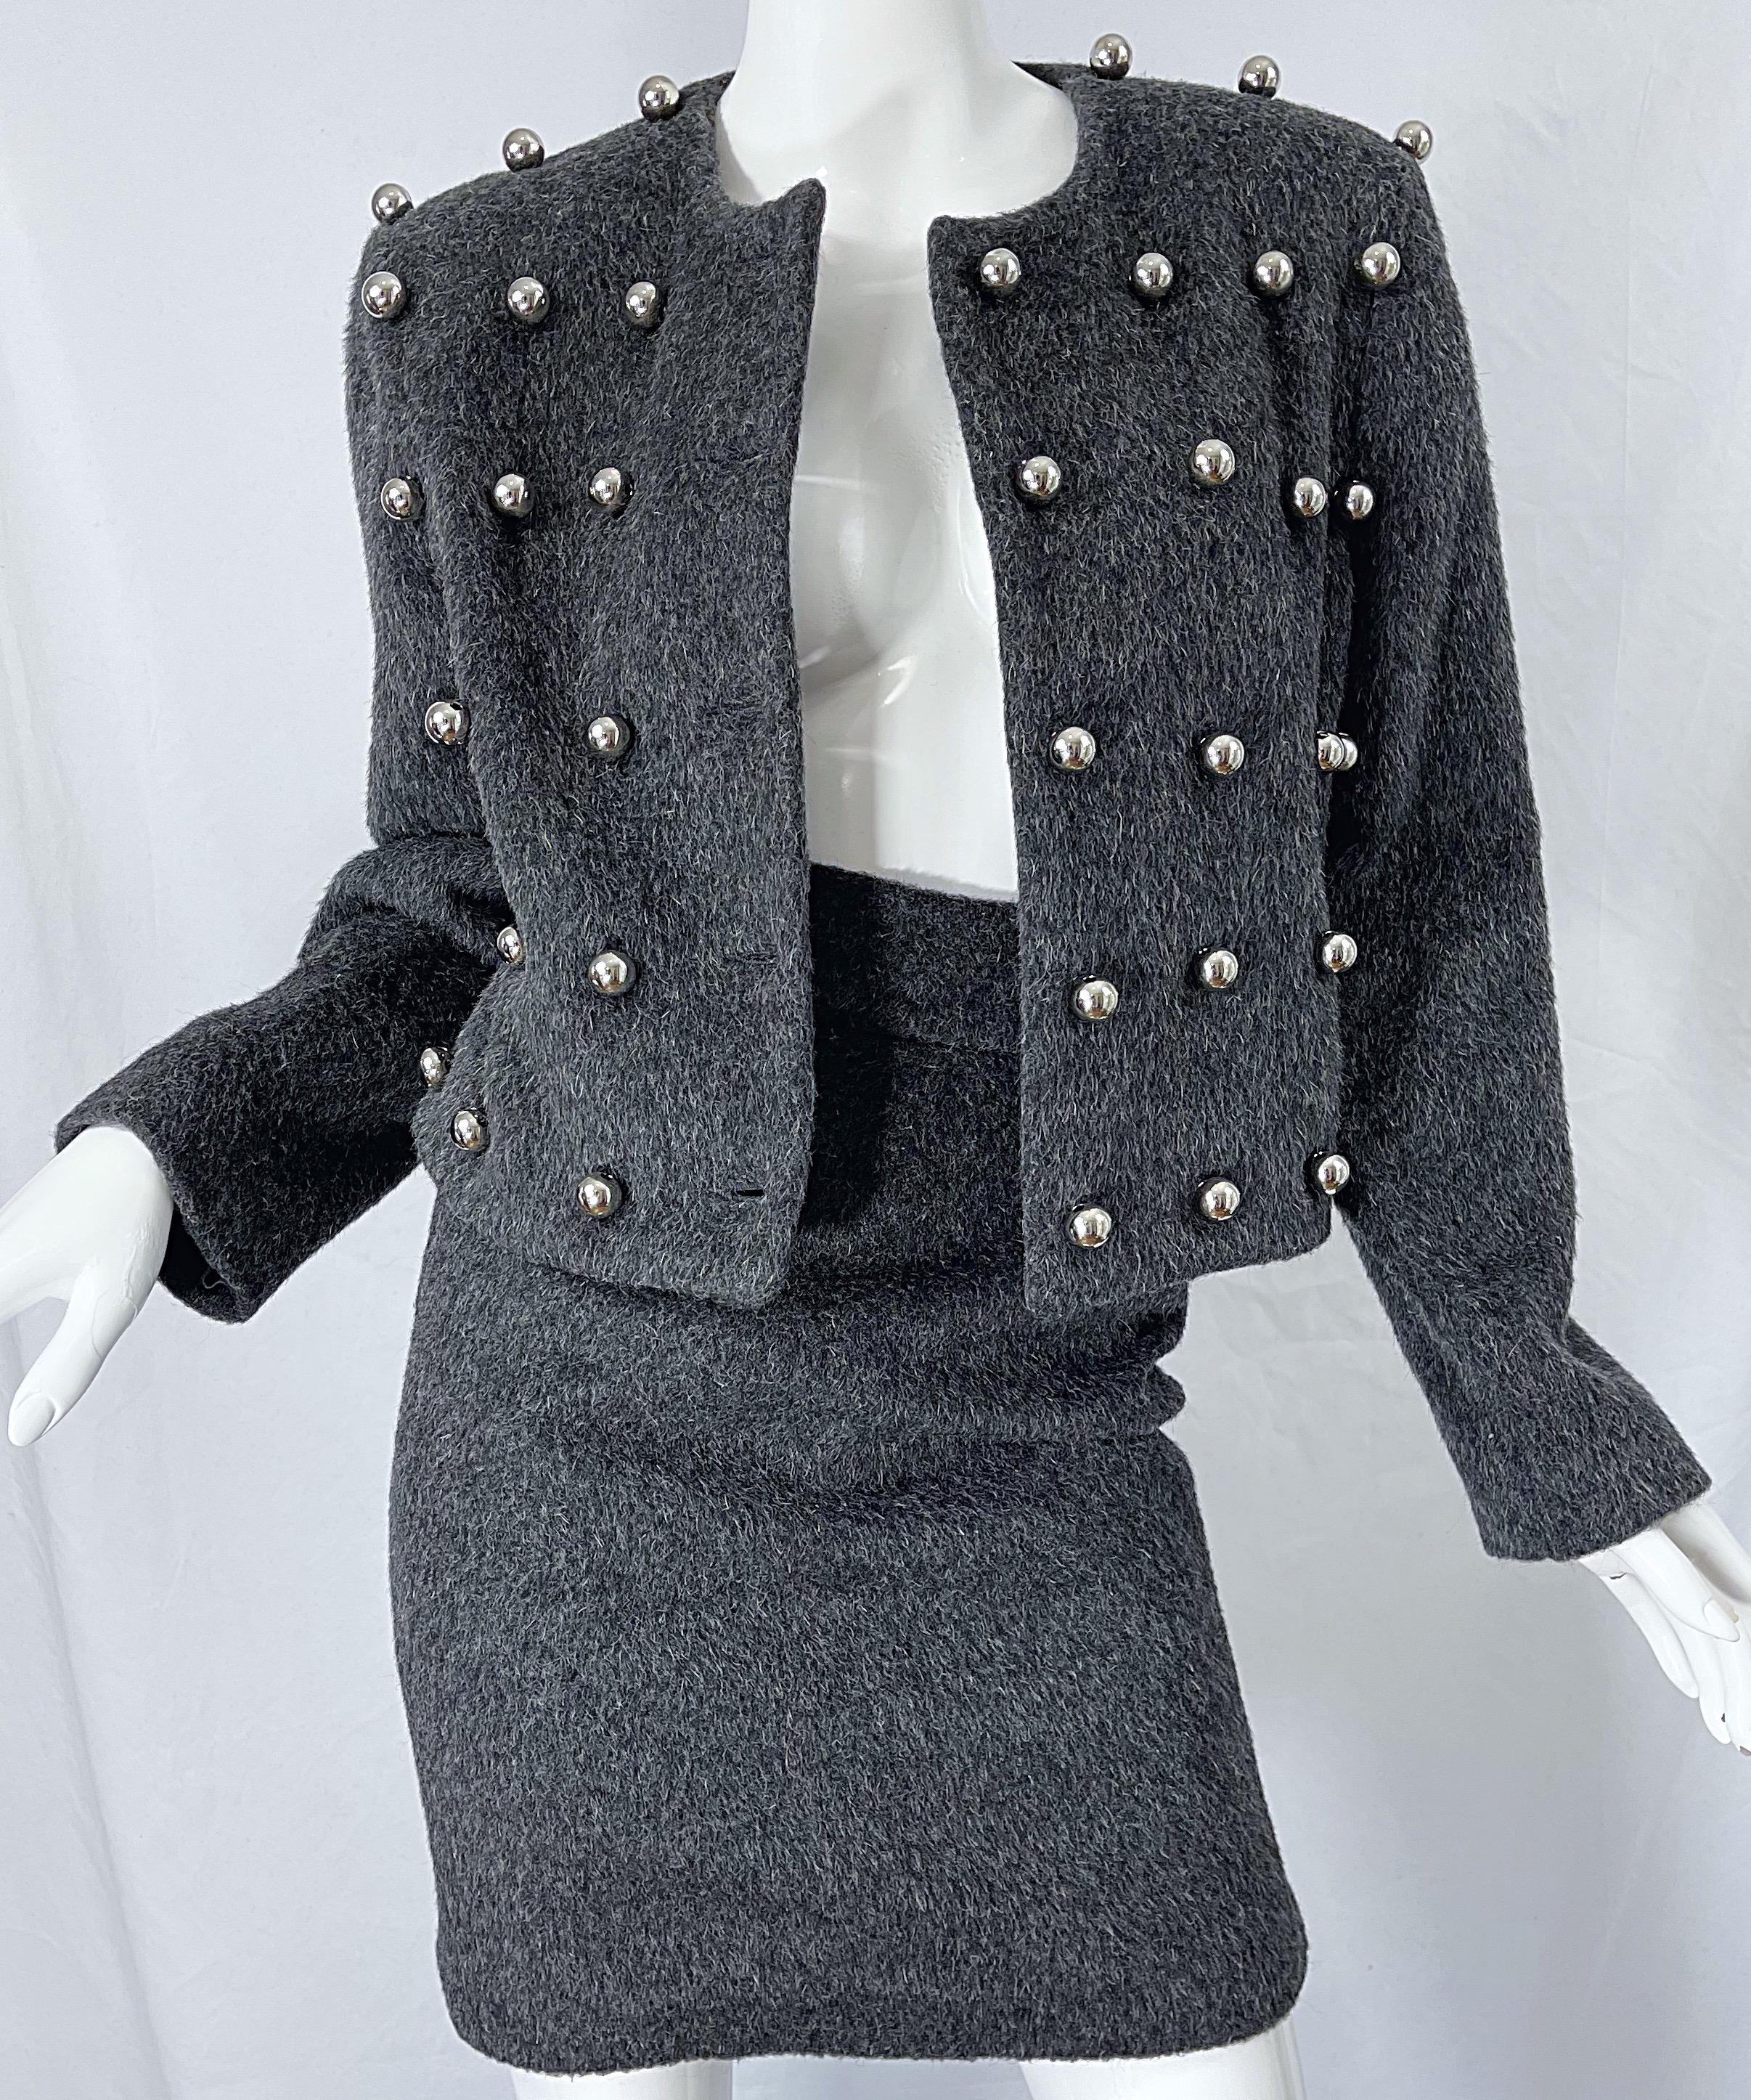 Patrick Kelly 1980s Charcoal Grey Silver Studded Balls Vintage 80s Skirt Suit In Excellent Condition For Sale In San Diego, CA